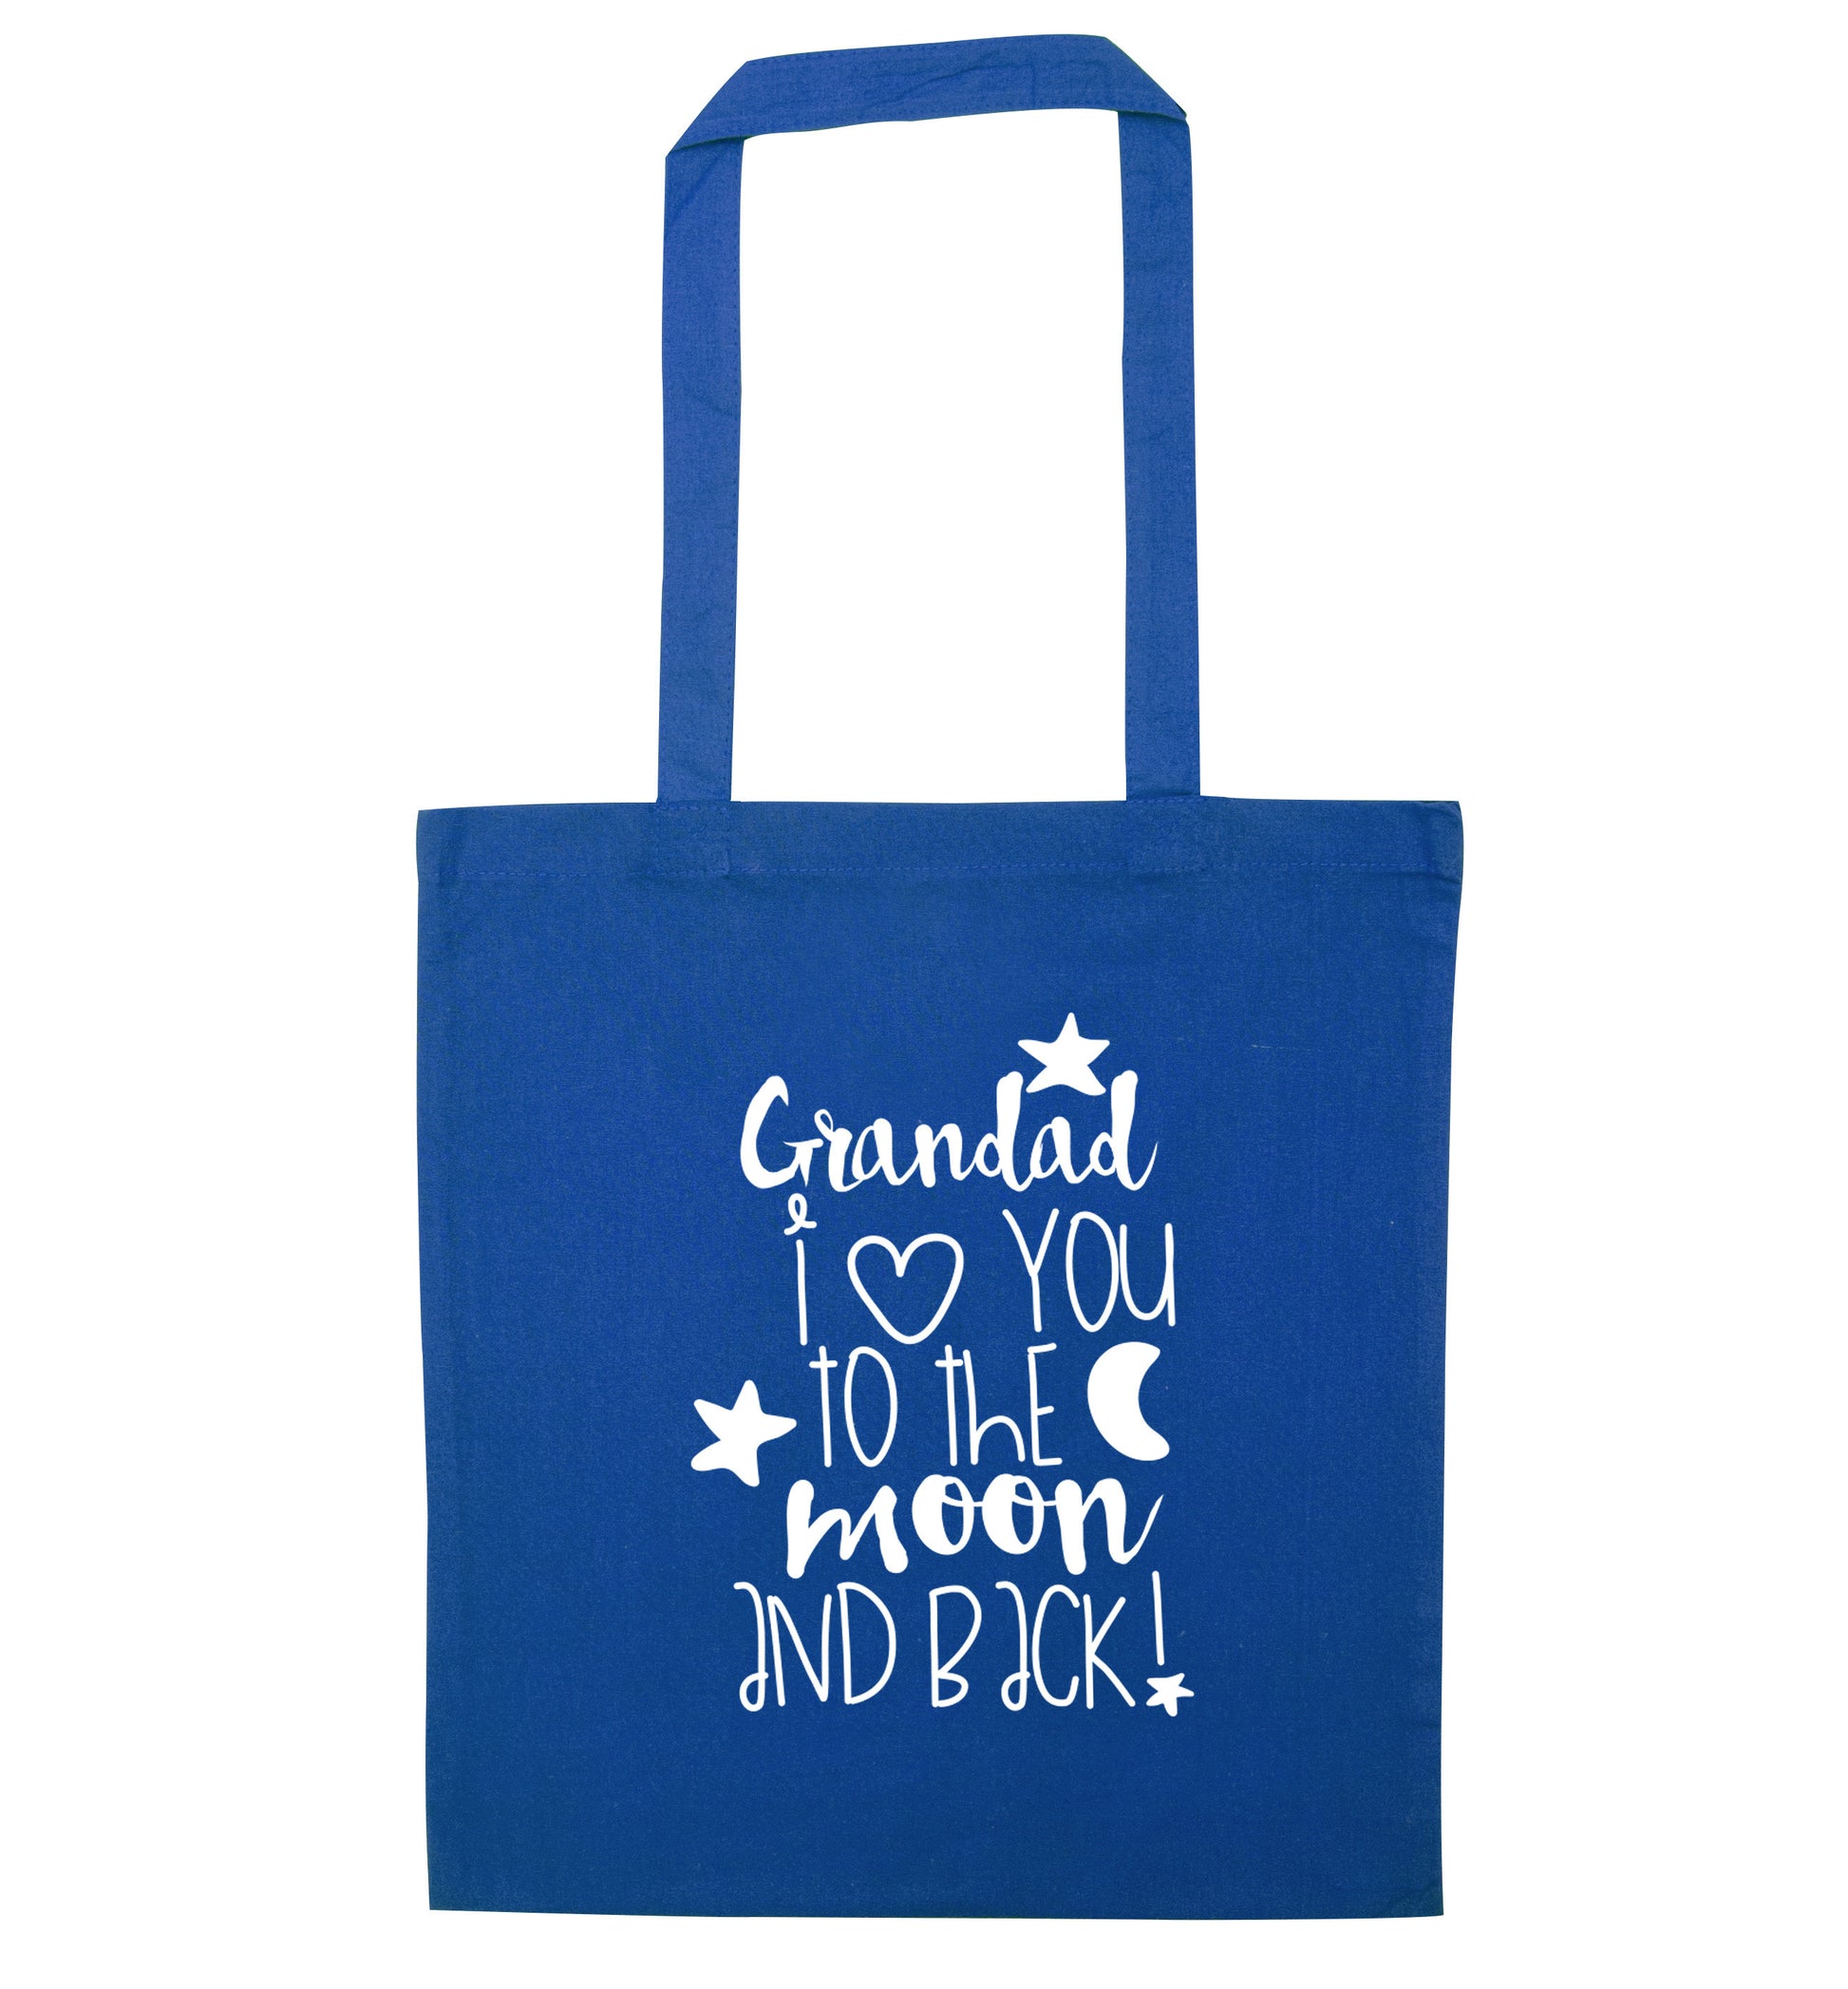 Grandad's I love you to the moon and back blue tote bag